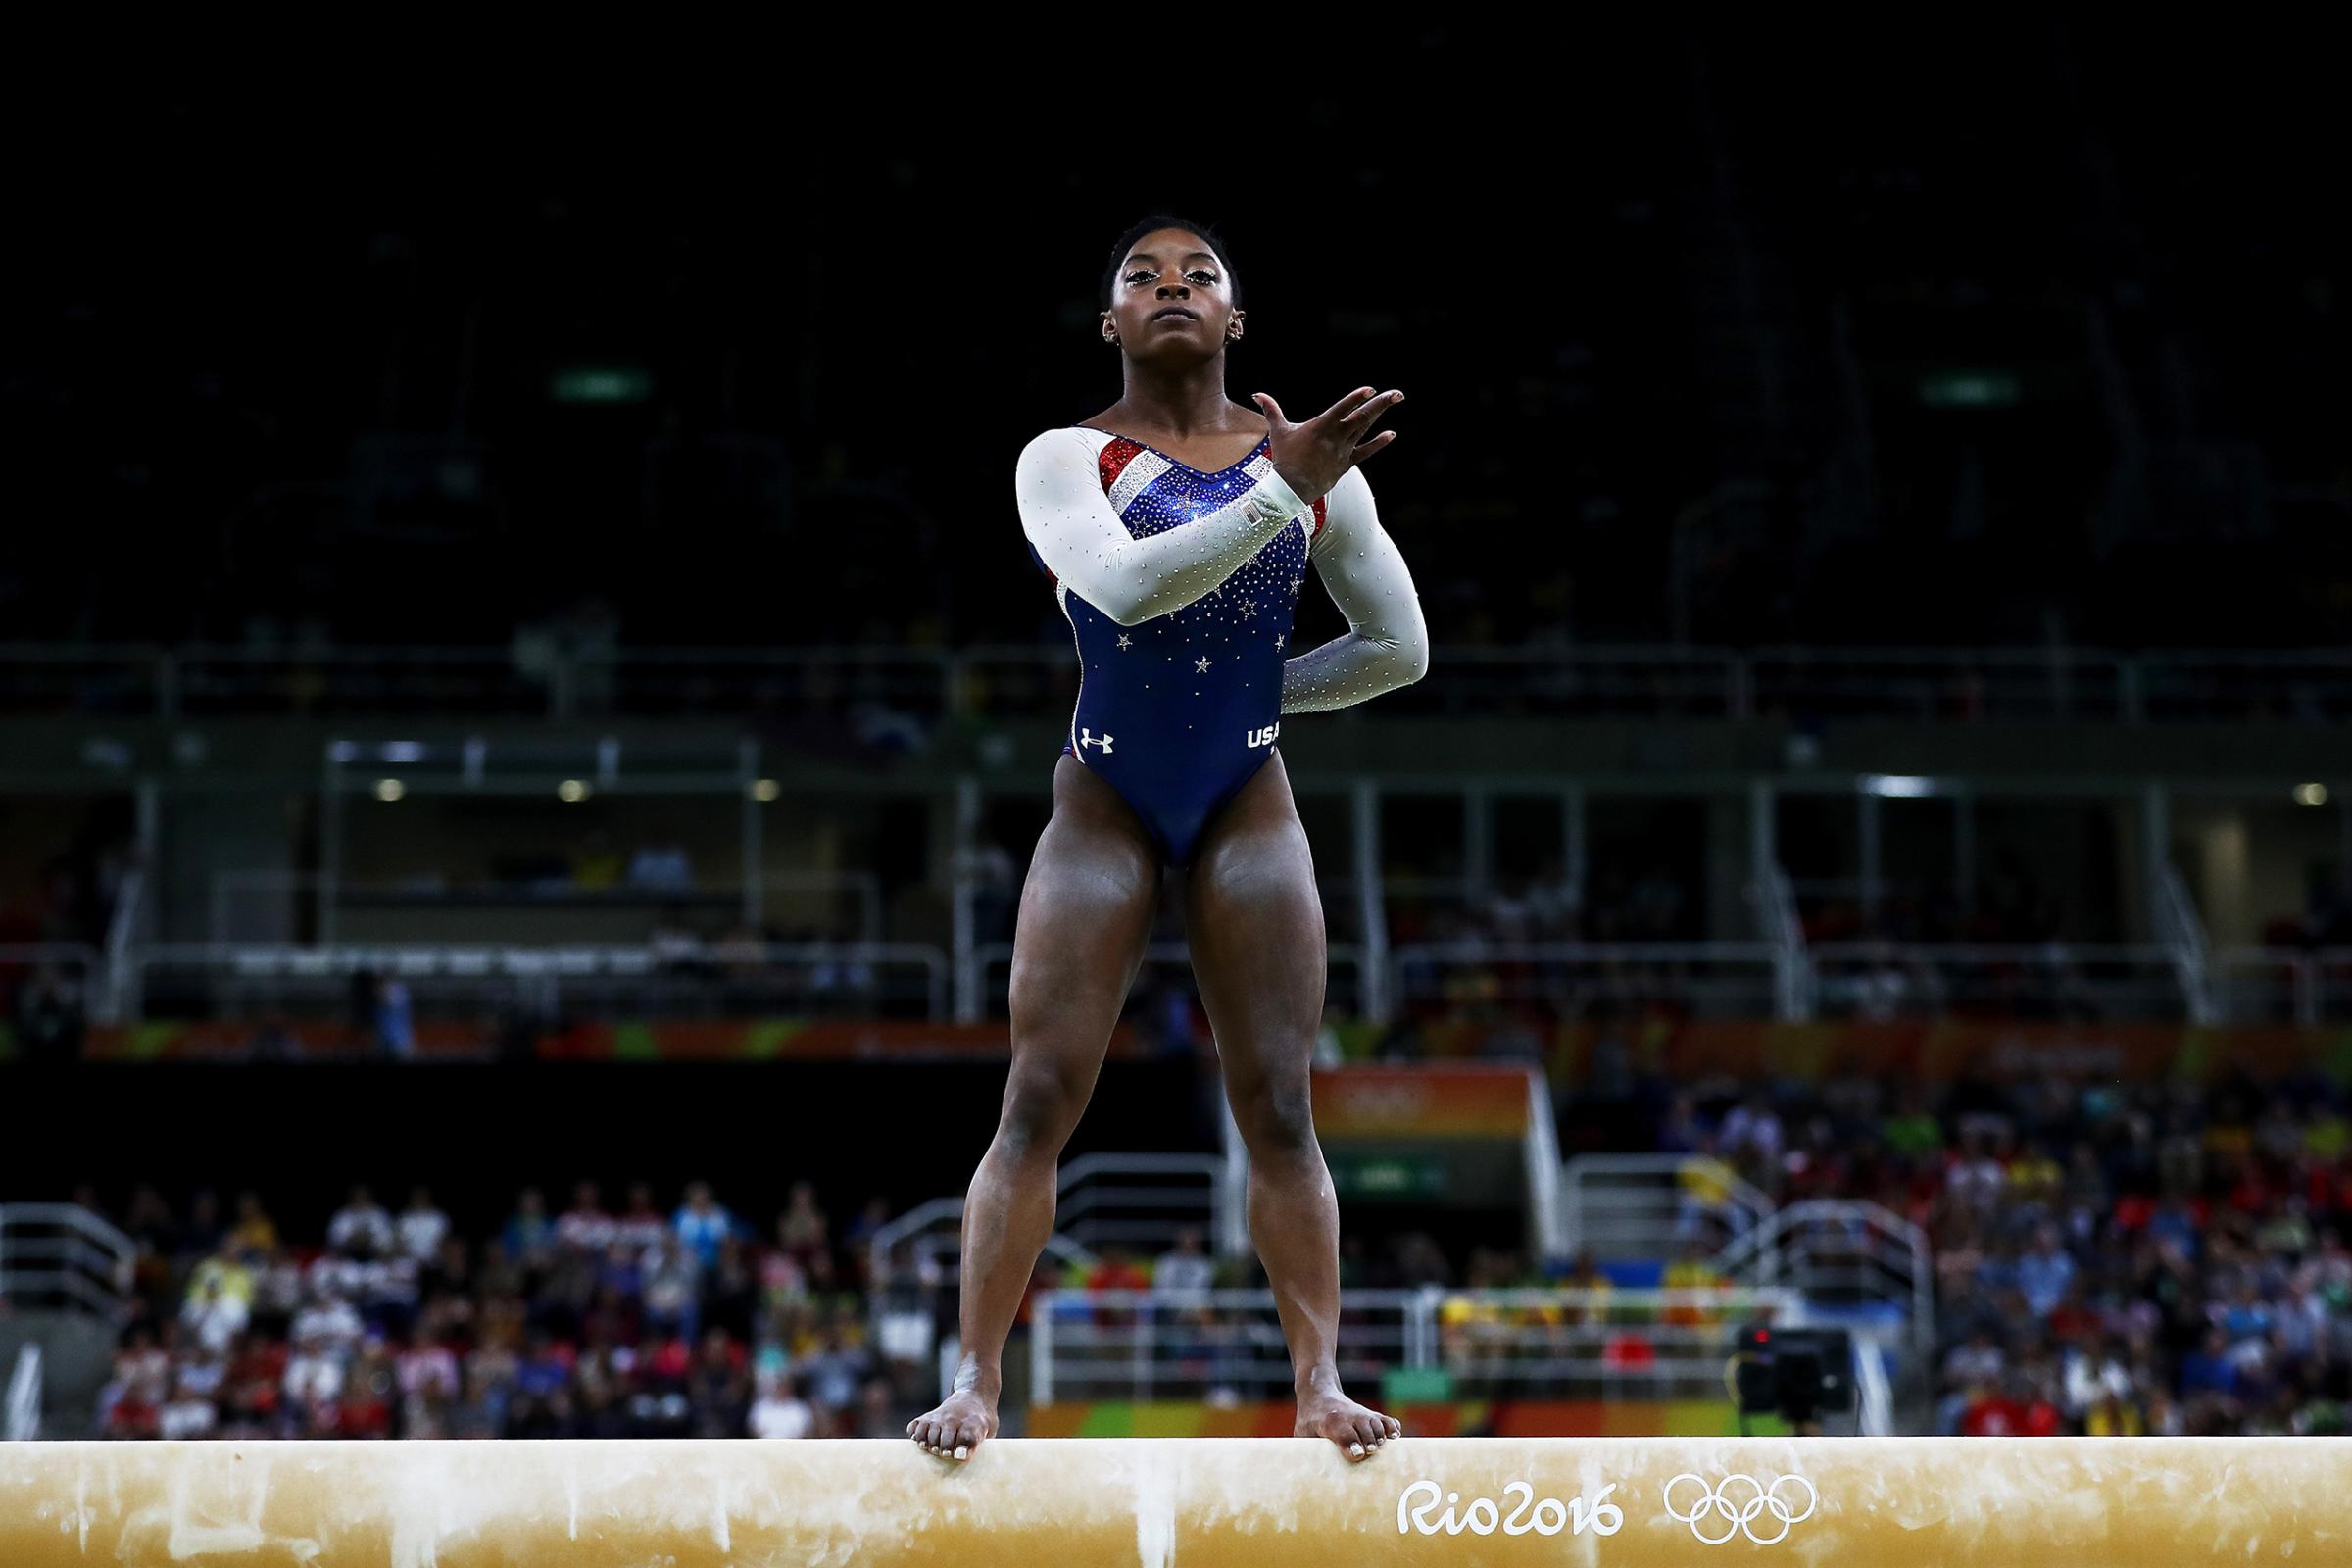 Simone Biles of the United States competes on the balance beam during the Women's Individual All Around Final on Day 6 of the 2016 Rio Olympics at Rio Olympic Arena on Aug. 11, 2016.